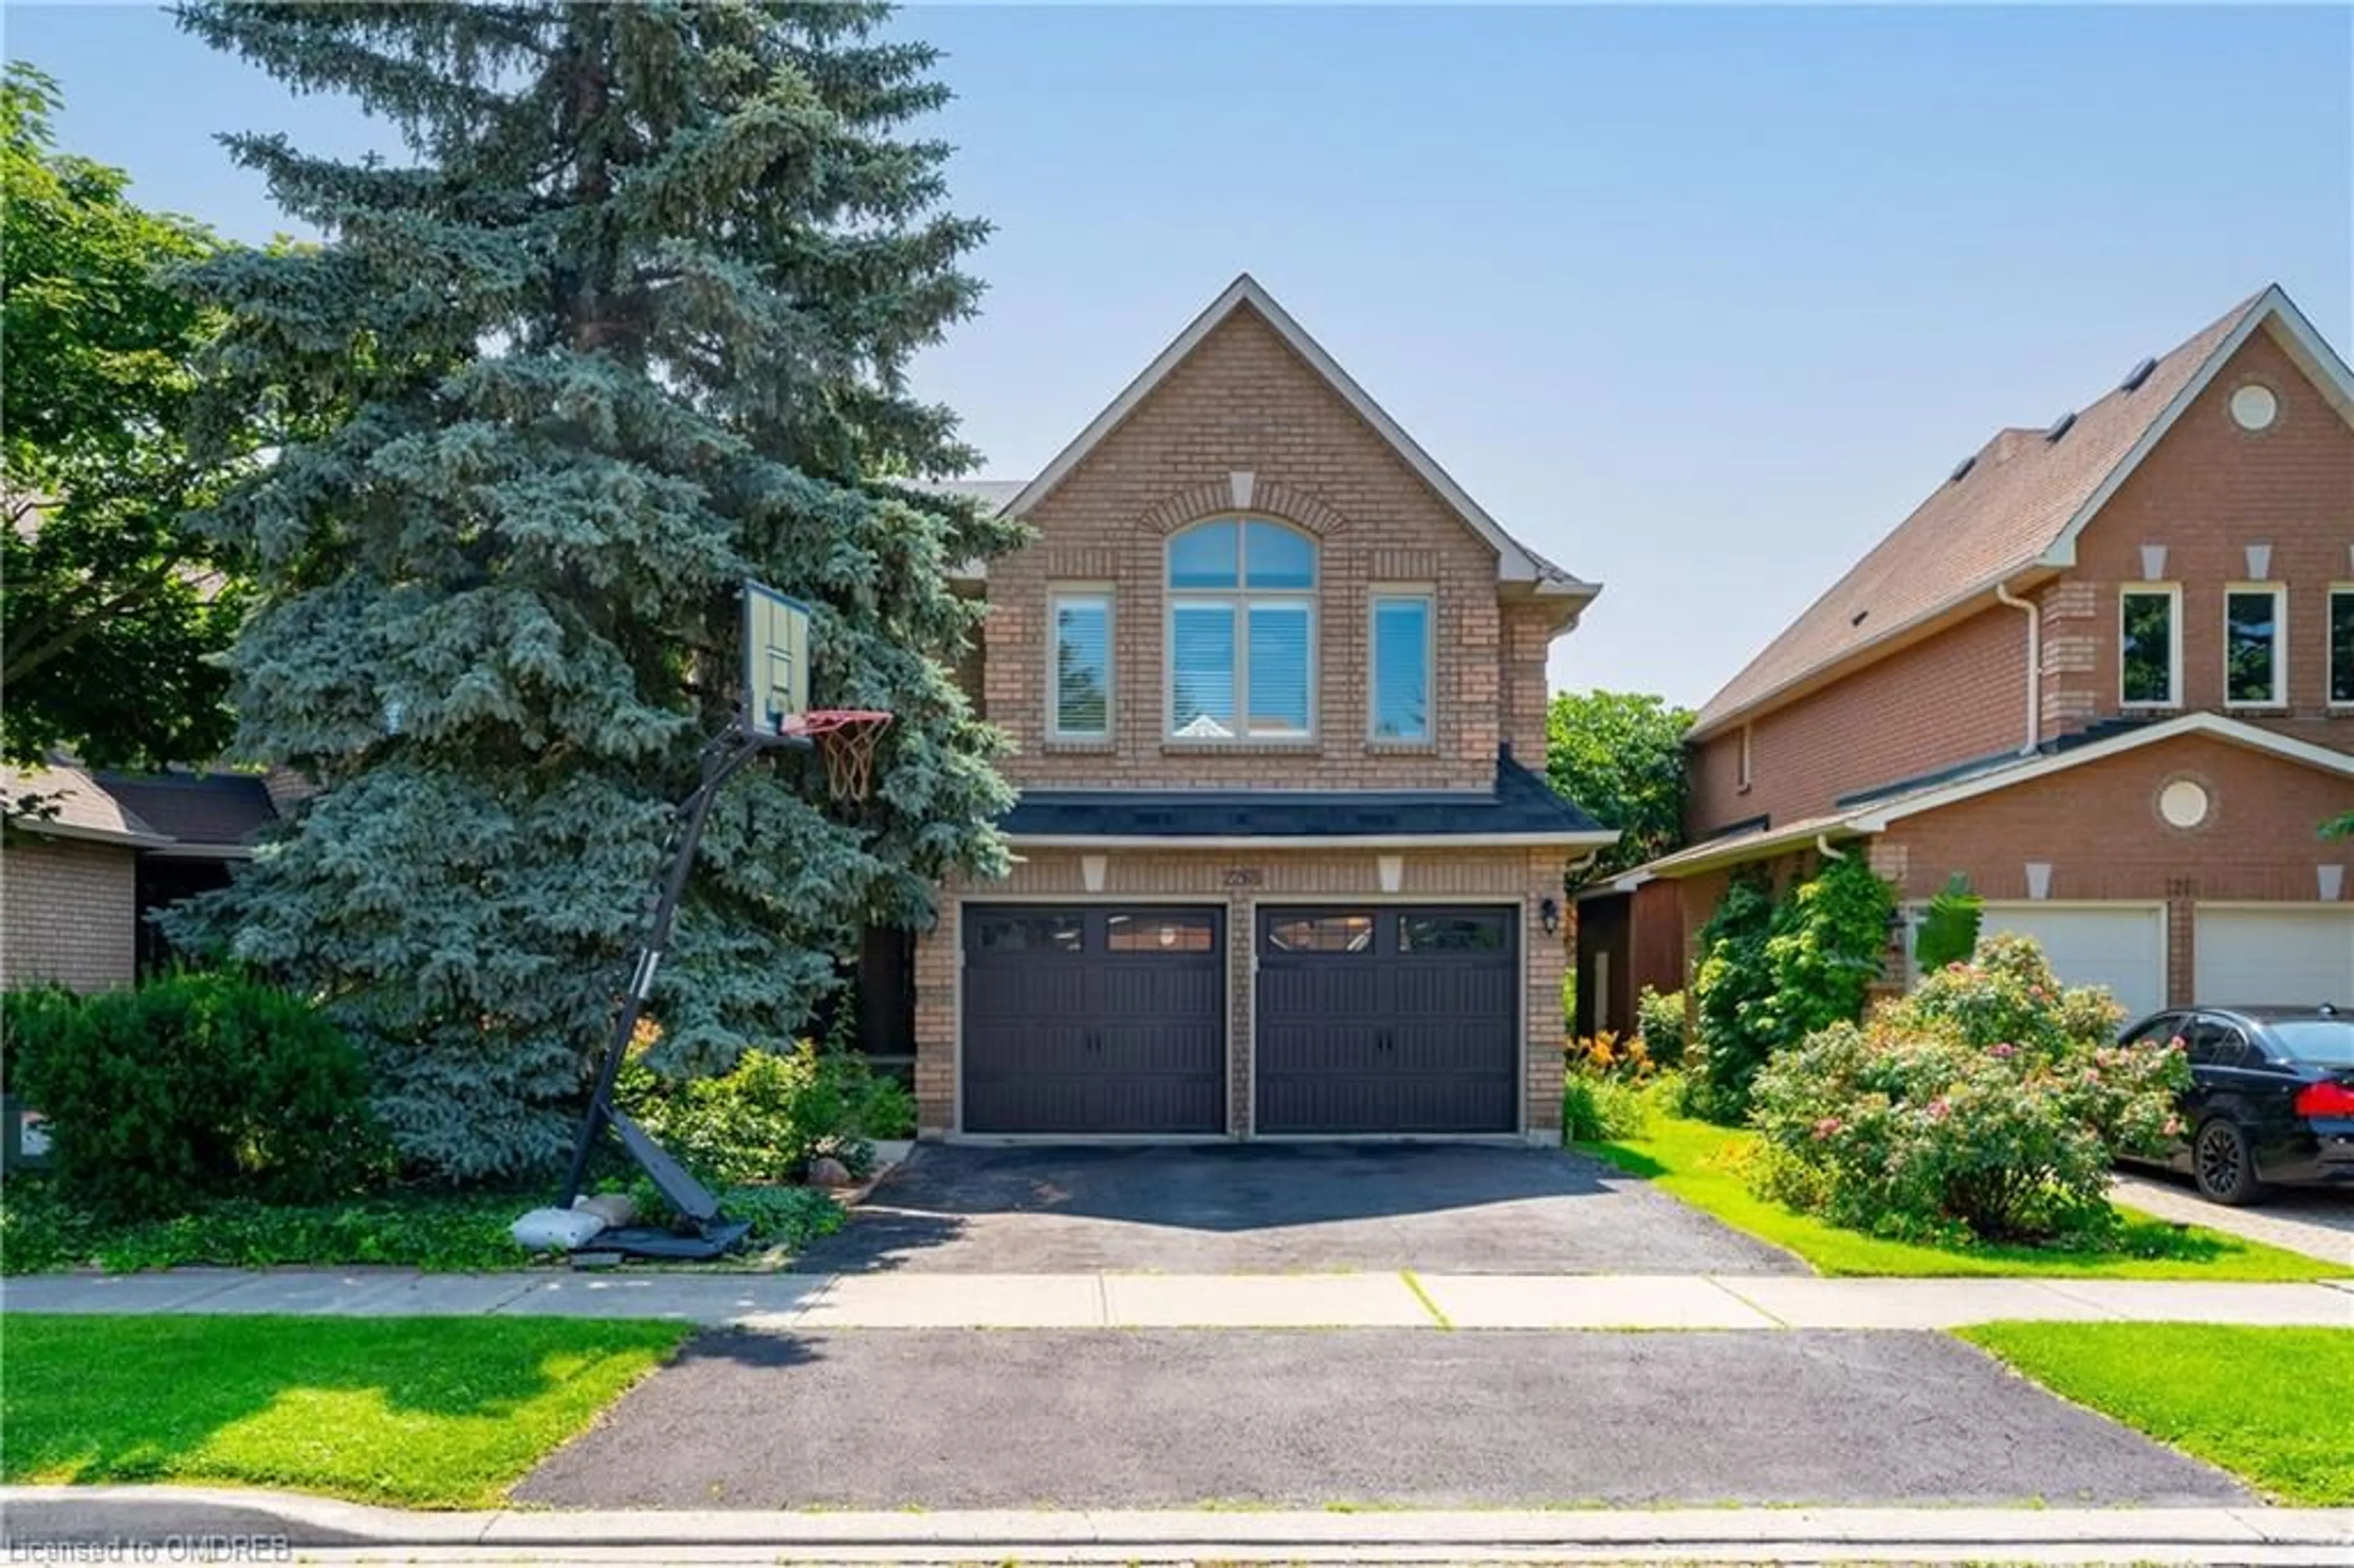 Home with brick exterior material for 2265 Brays Lane, Oakville Ontario L6M 3J5